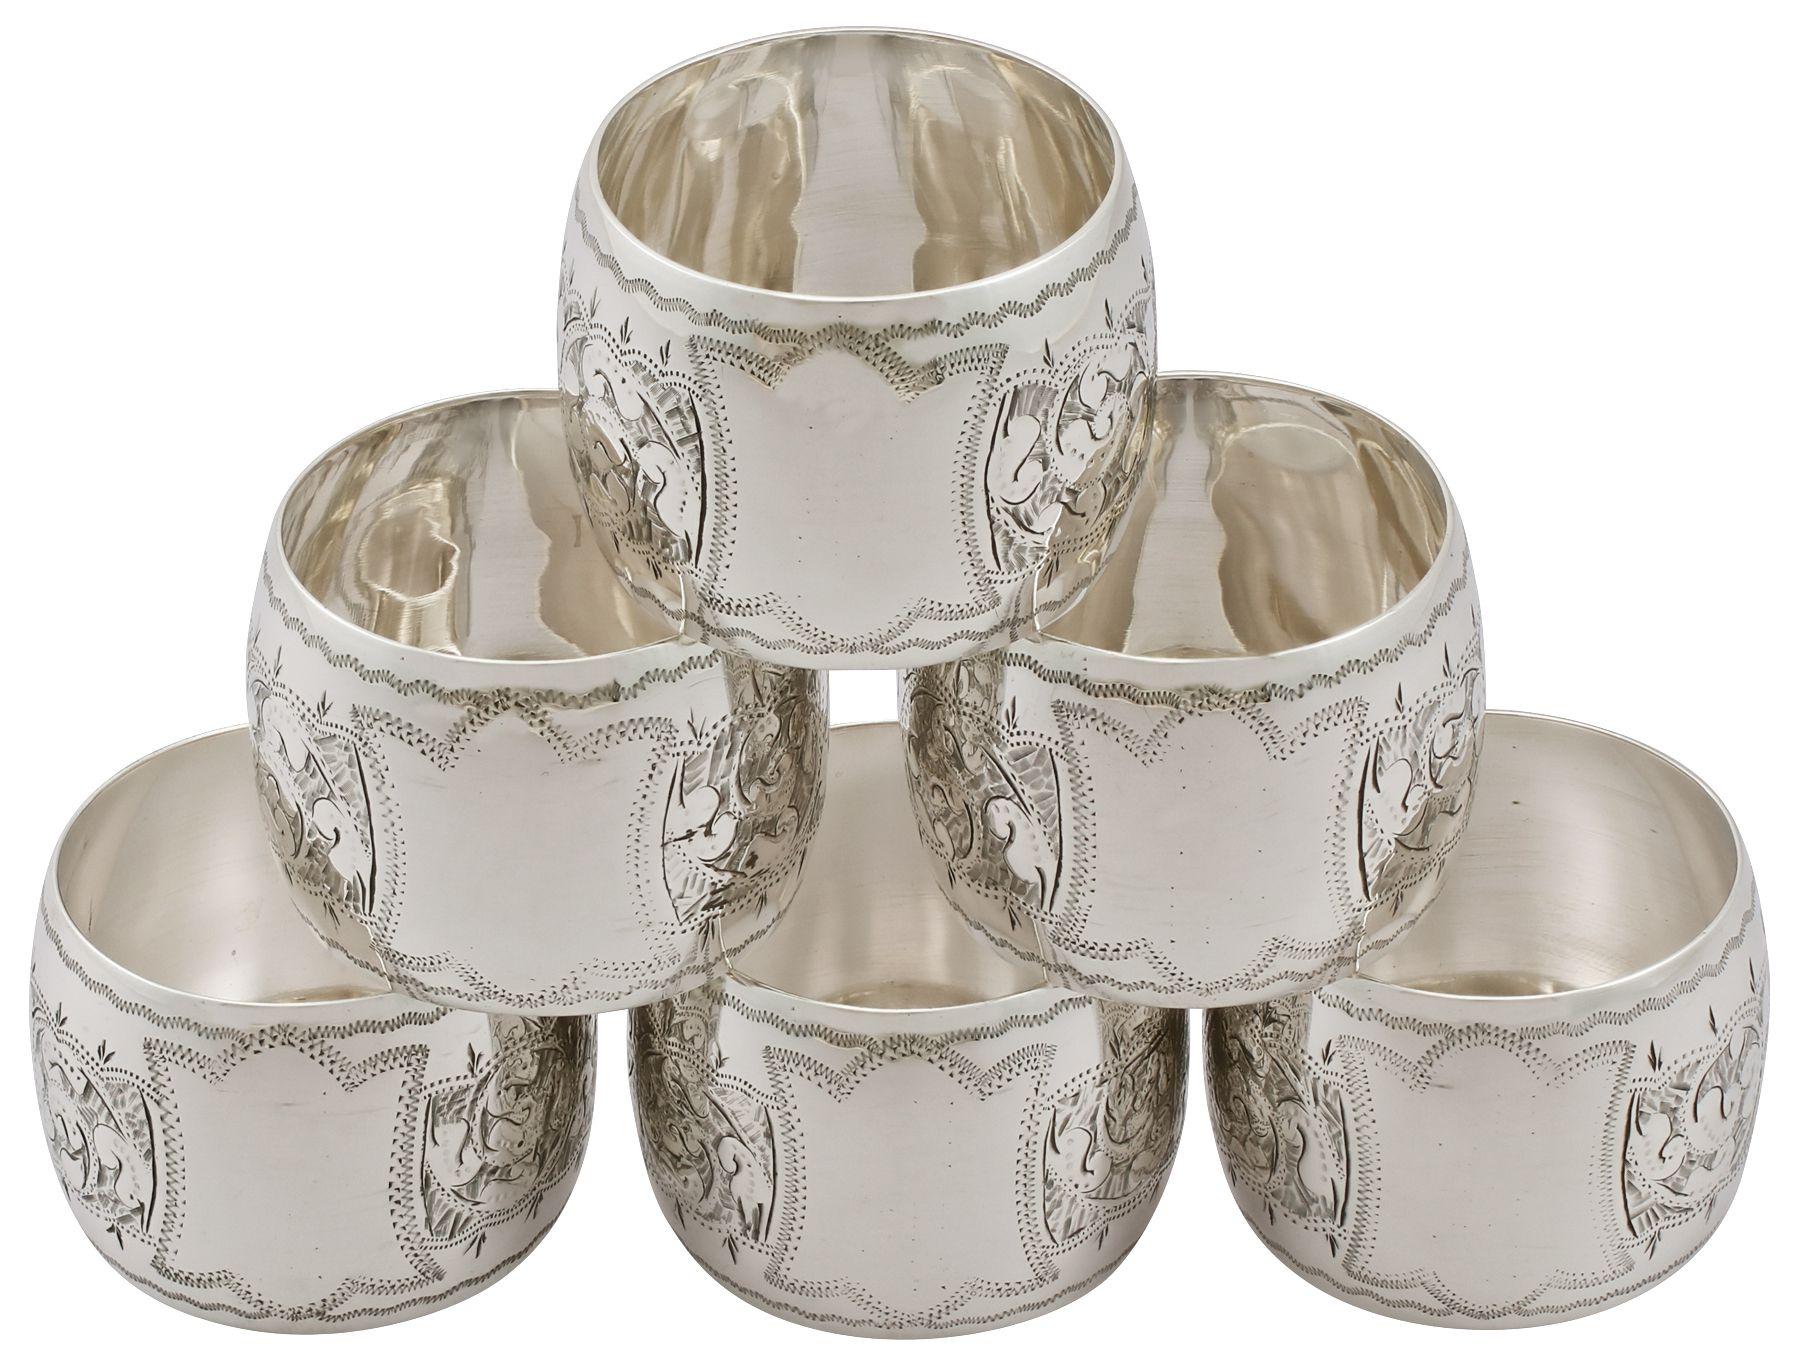 An exceptional, fine and impressive set of six antique Victorian English sterling silver napkin rings - boxed; an addition to our dining silverware collection

This exceptional set of antique George V silver napkin rings consists of six napkin